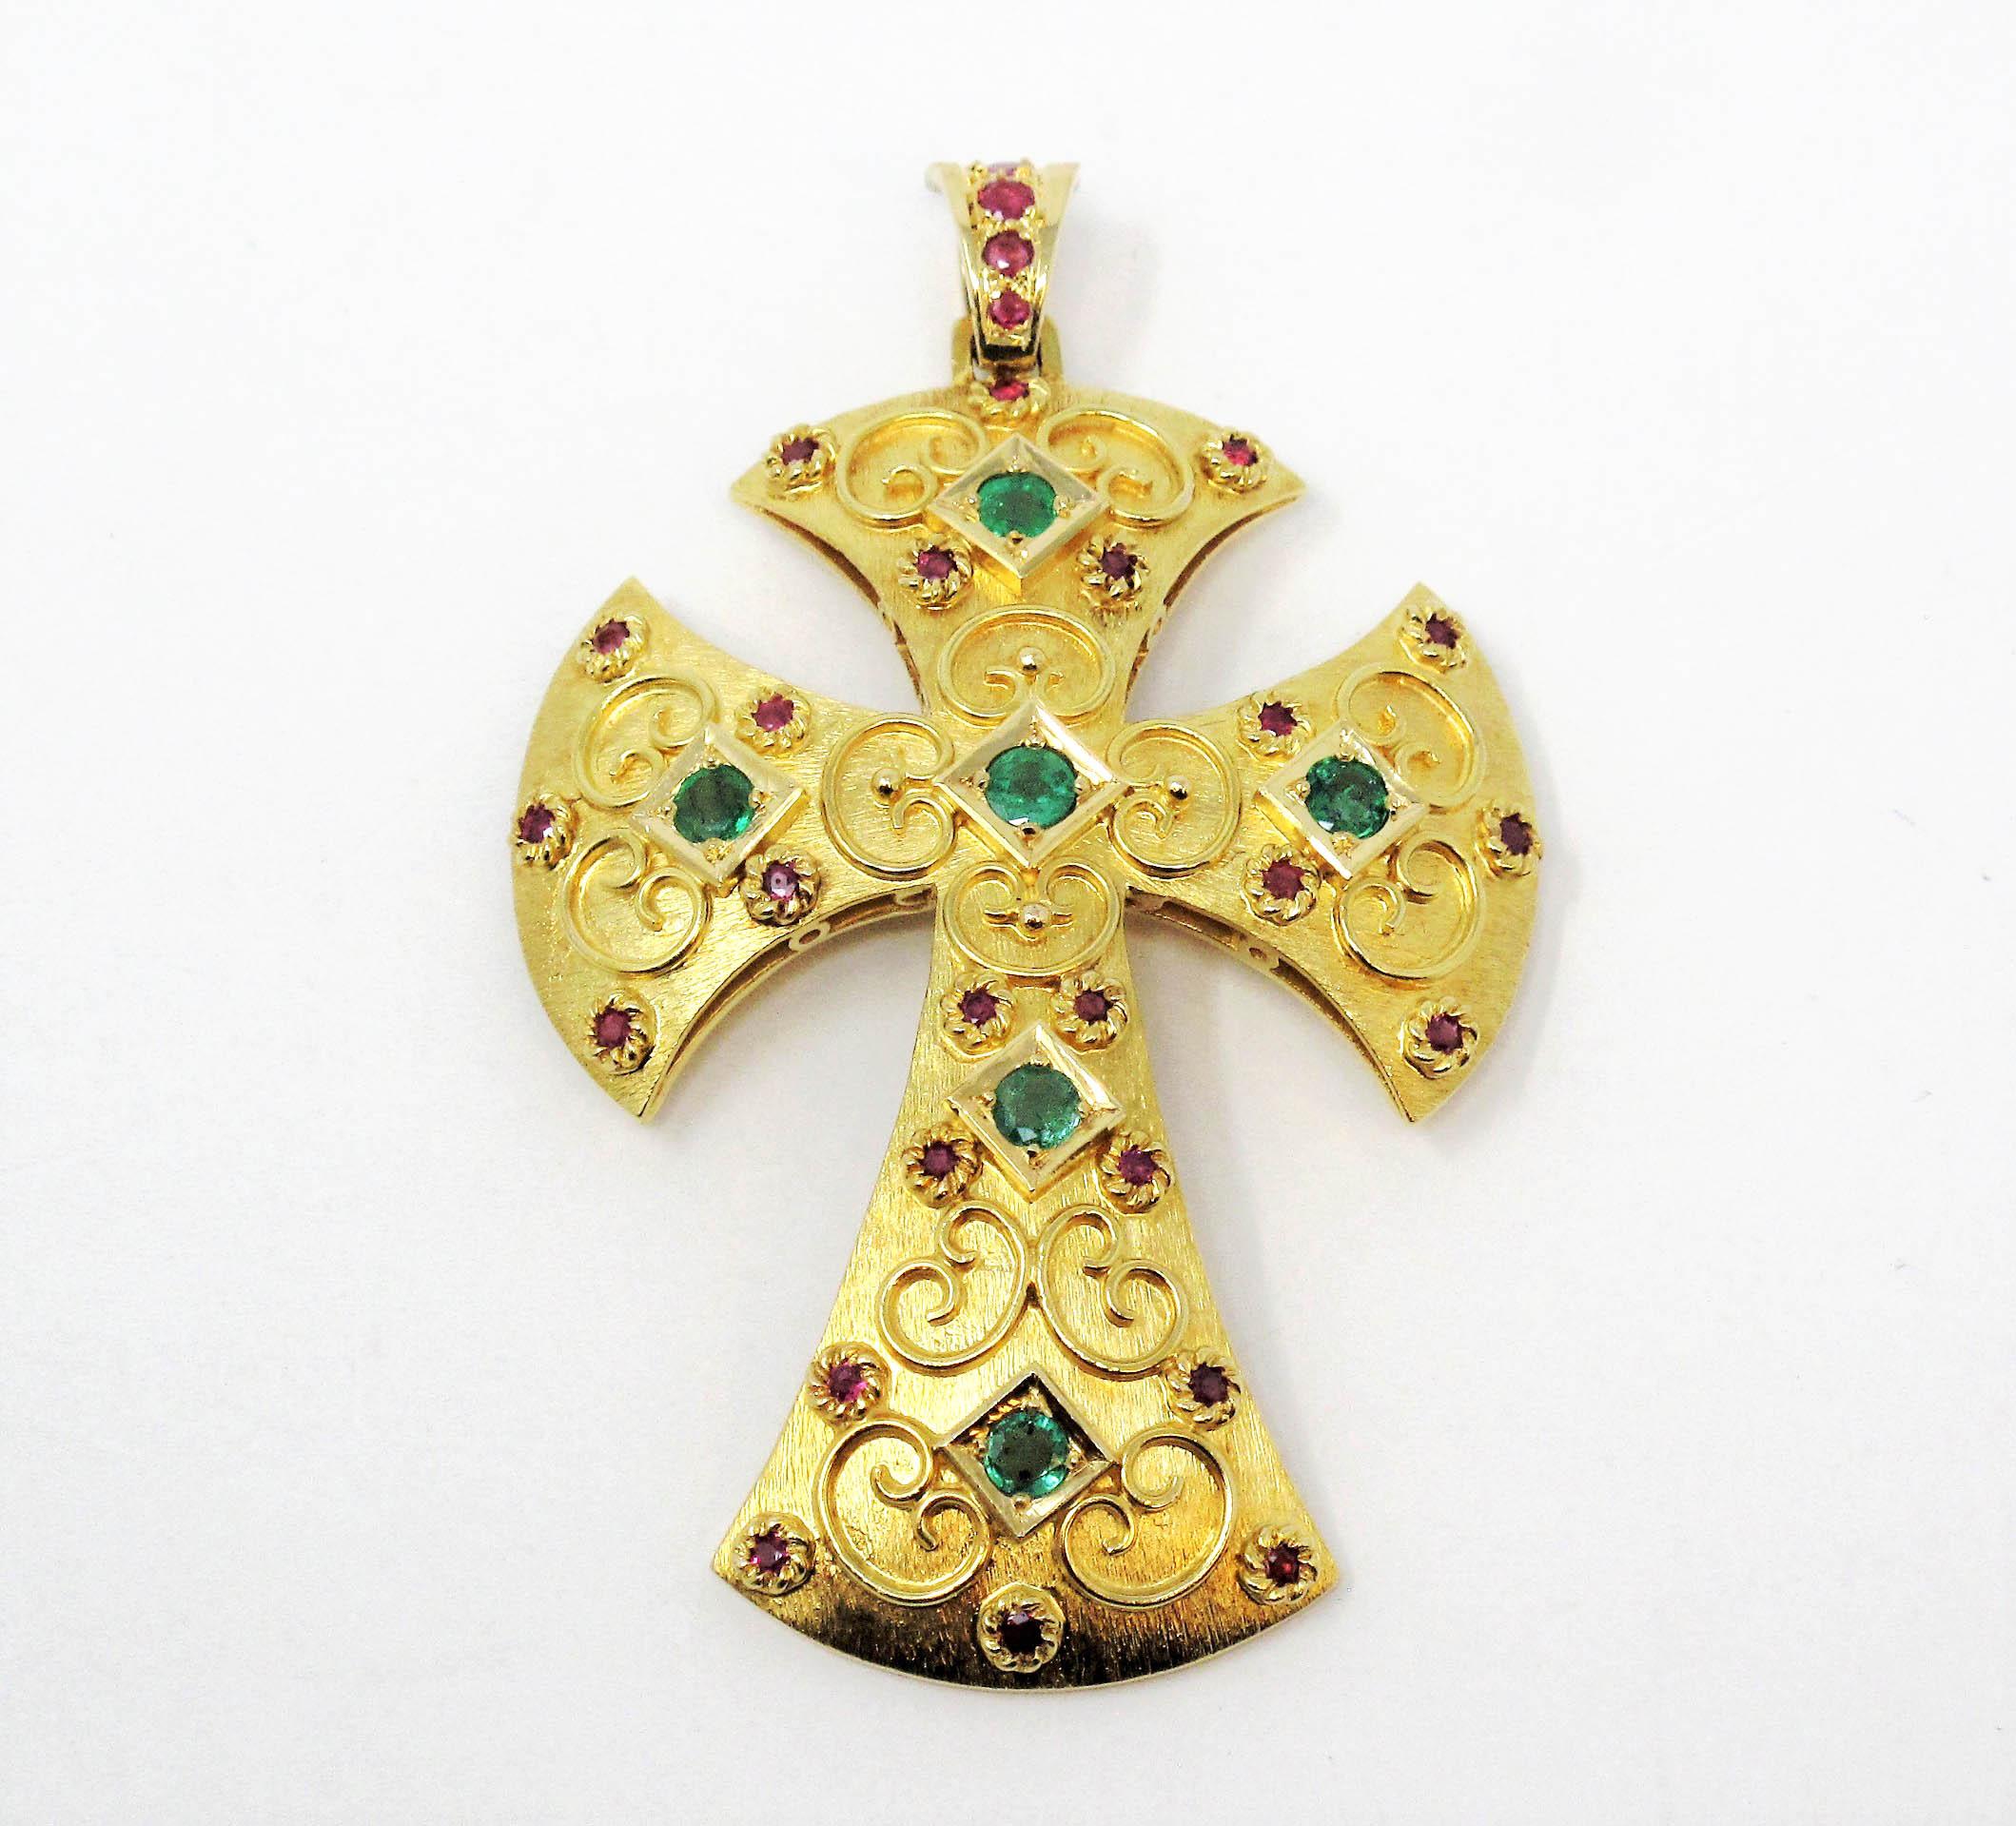 This incredible Etruscan style cross pendant is an absolute work of art. The subtly textured matte gold finish, paired with the vivid gemstones and intricate swirl design makes this ornate piece a stunning addition to your collection. 

This